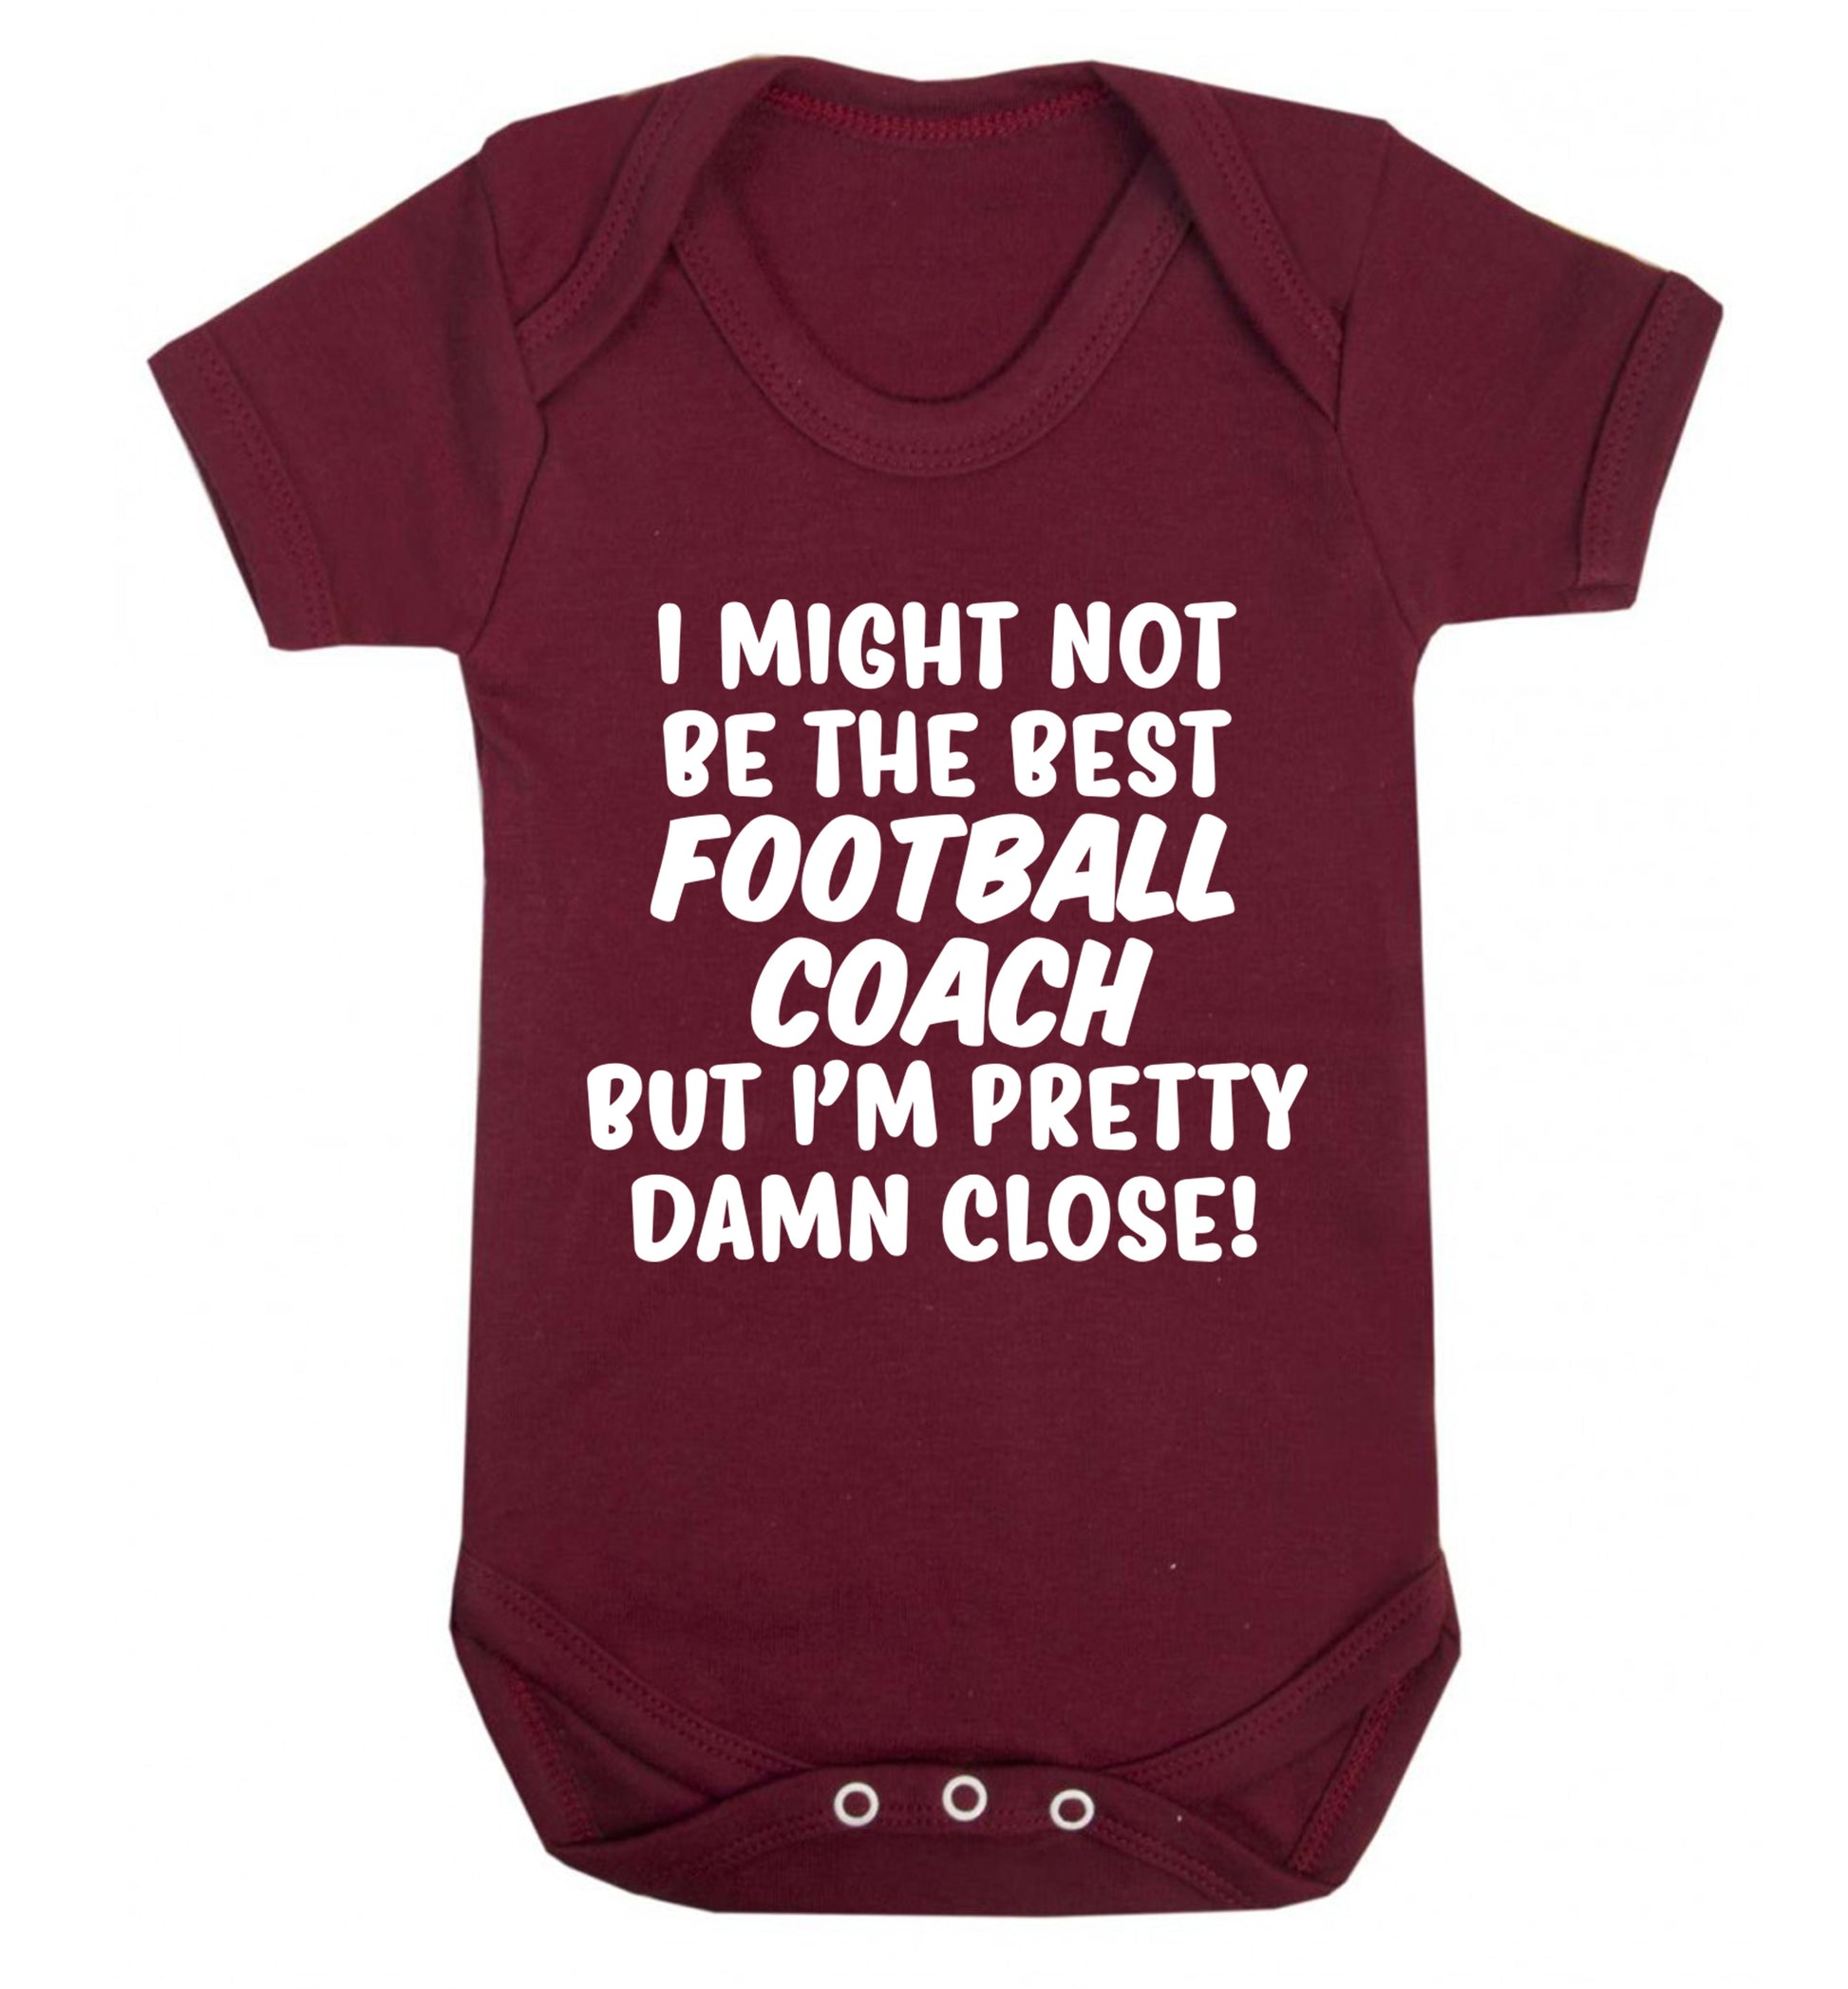 I might not be the best football coach but I'm pretty close! Baby Vest maroon 18-24 months